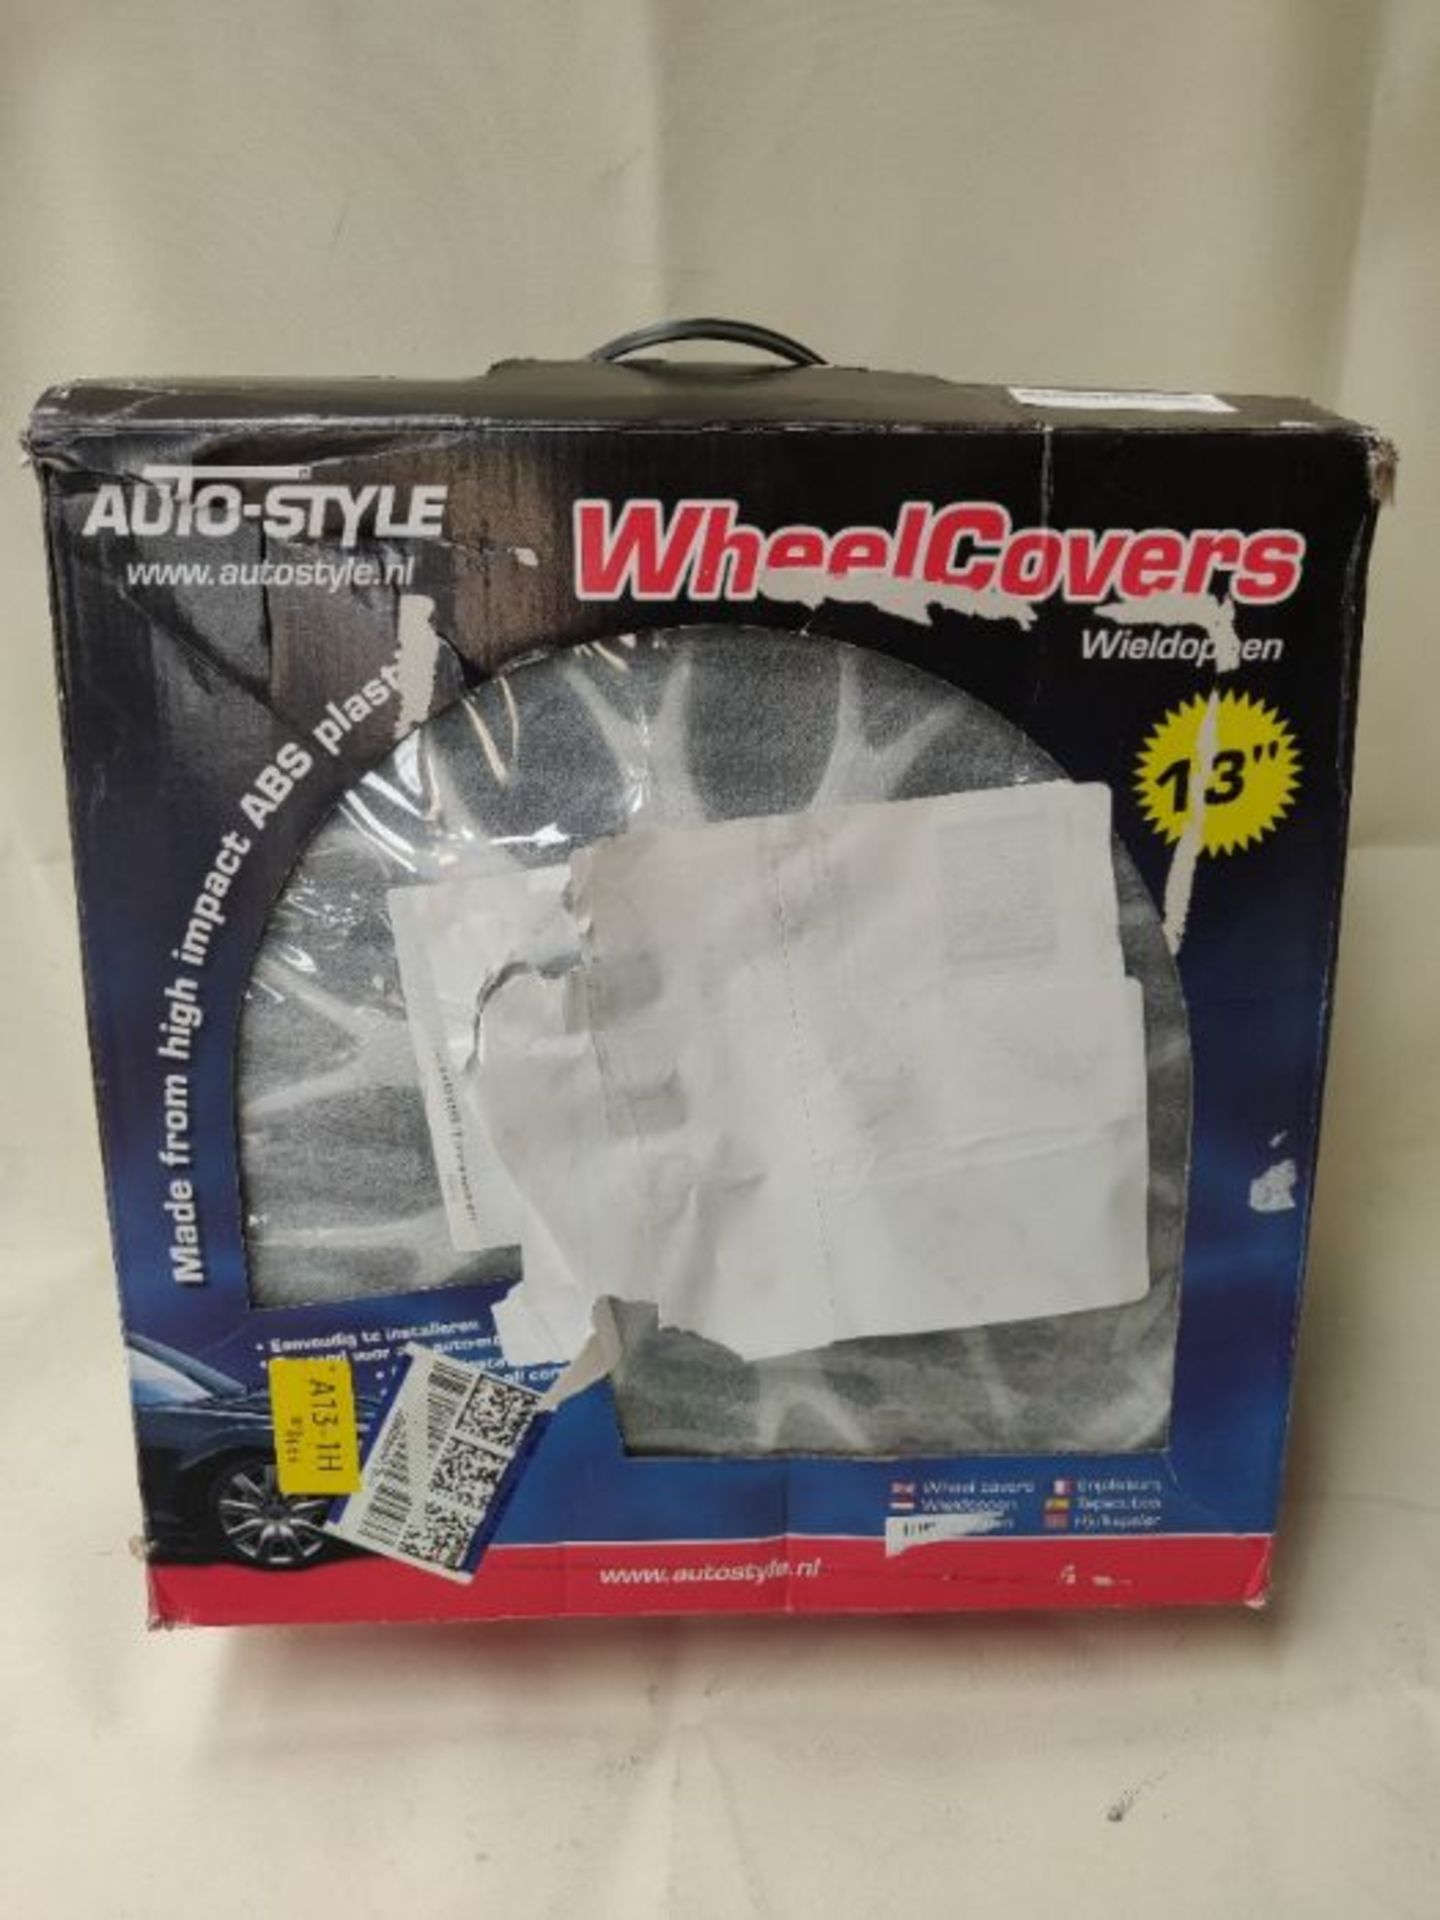 [CRACKED] AUTOSTYLE PP9703 Set wheel covers Missouri 13-inch silver - Image 2 of 3